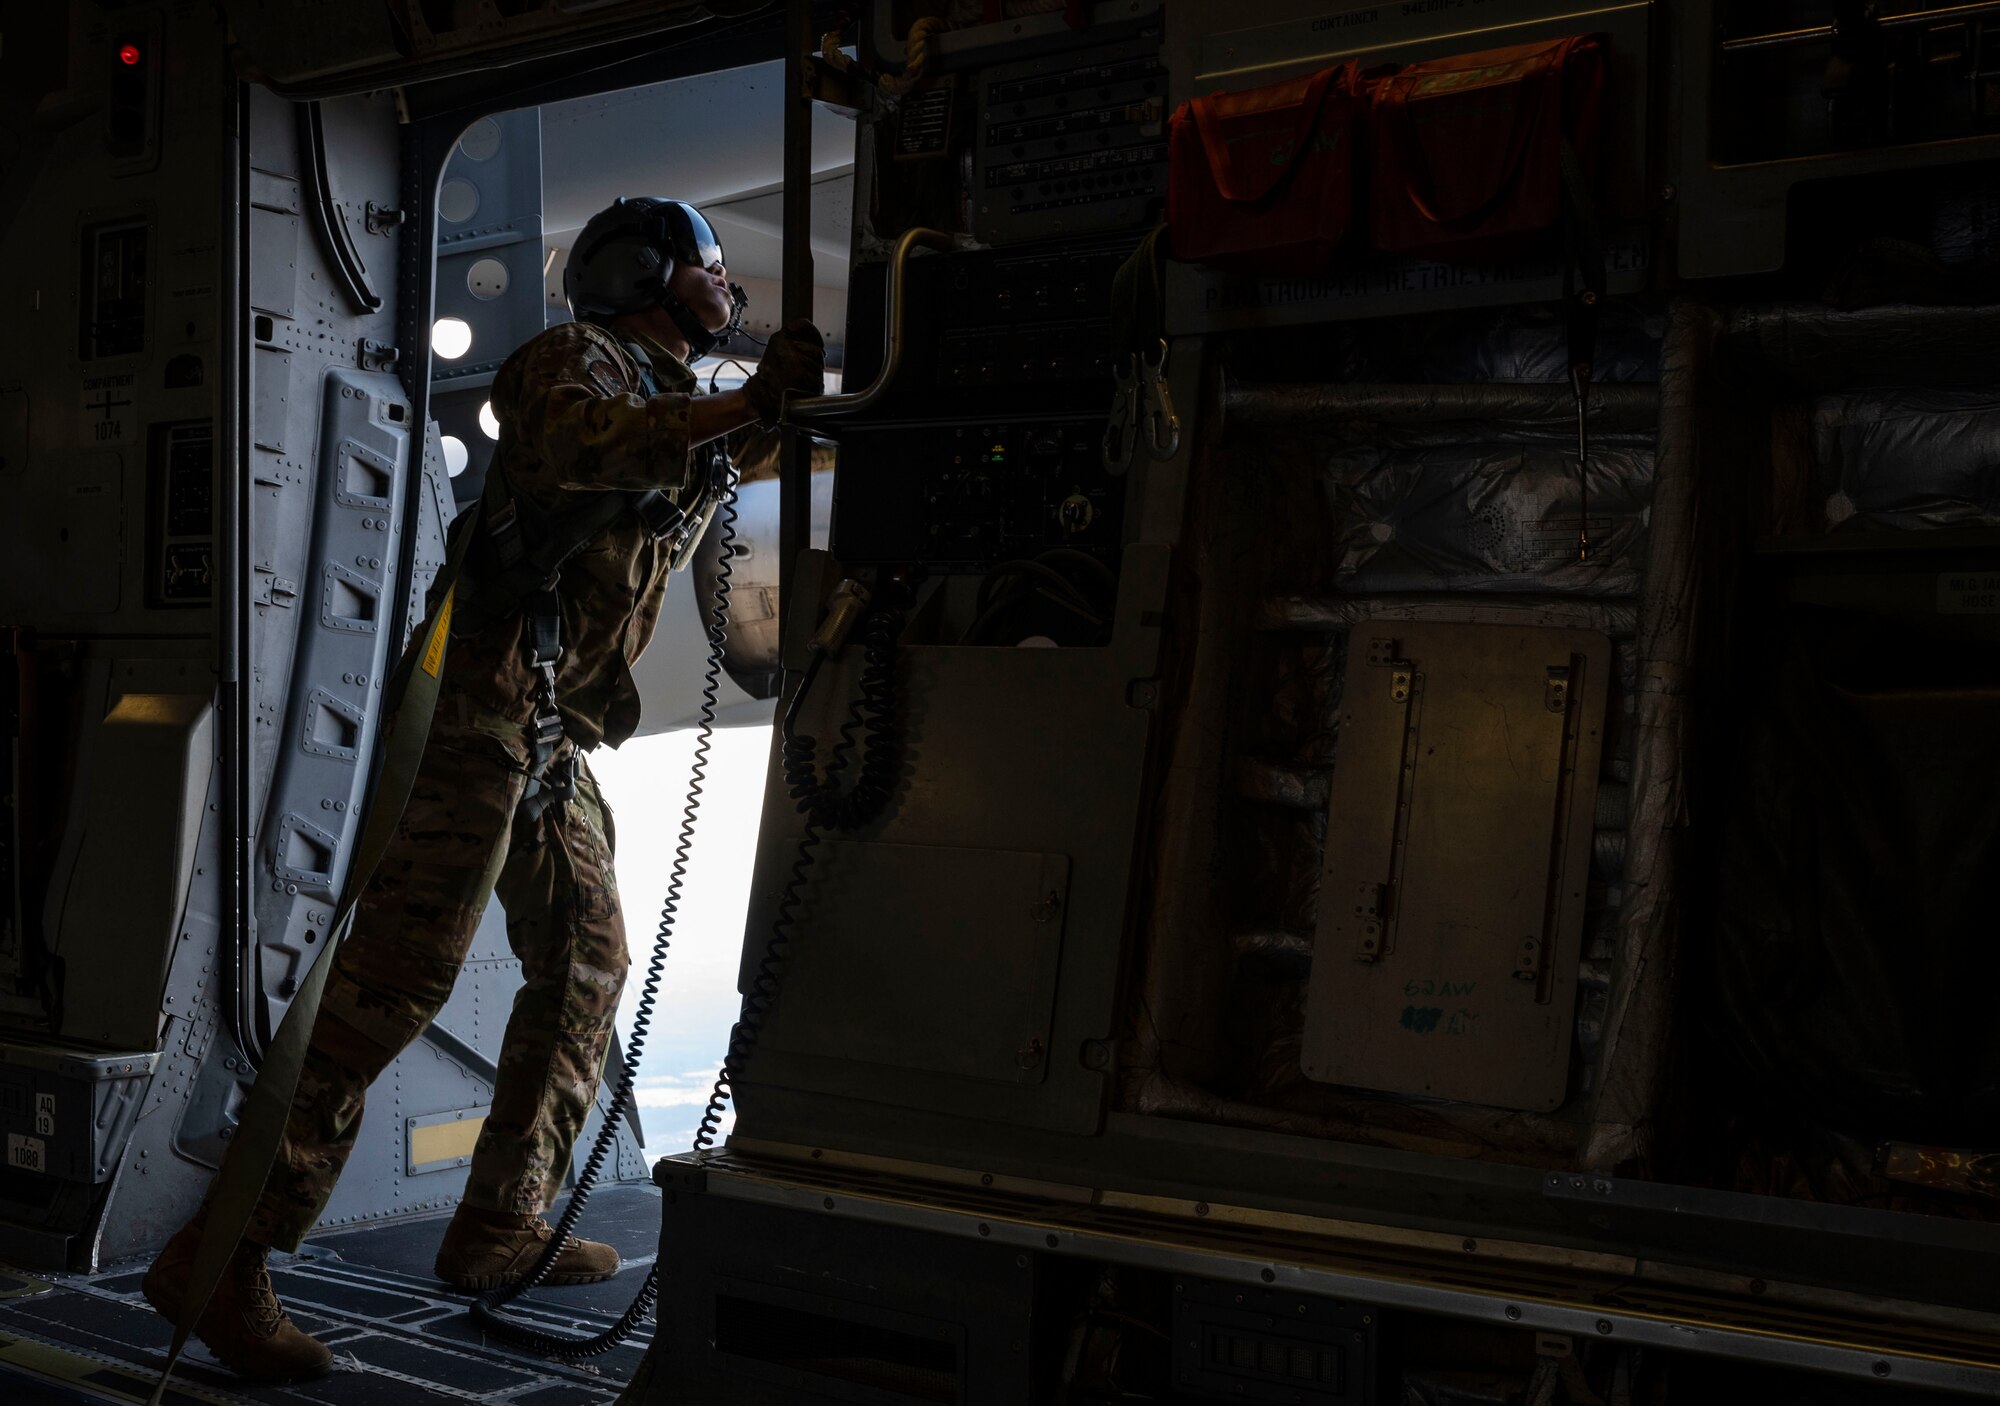 U.S. Air Force Senior Airman Keoni Gibson, 8th Airlift Squadron loadmaster, checks the perimeter of a door on a C-17 Globemaster III assigned to the 62nd Airlift Wing, Joint Base Lewis-McChord, Washington, prior to a static-line jump during Exercise Predictable Iron at Pope Army Airfield, Fort Bragg, North Carolina, Feb. 25, 2021. The exercise provided the opportunity for the U.S. Air Force and U.S. Army to strengthen their skill sets together and accomplish the Department of Defense’s mission to provide combat-credible military forces. (U.S. Air Force photo by Staff Sgt. Rachel Williams)